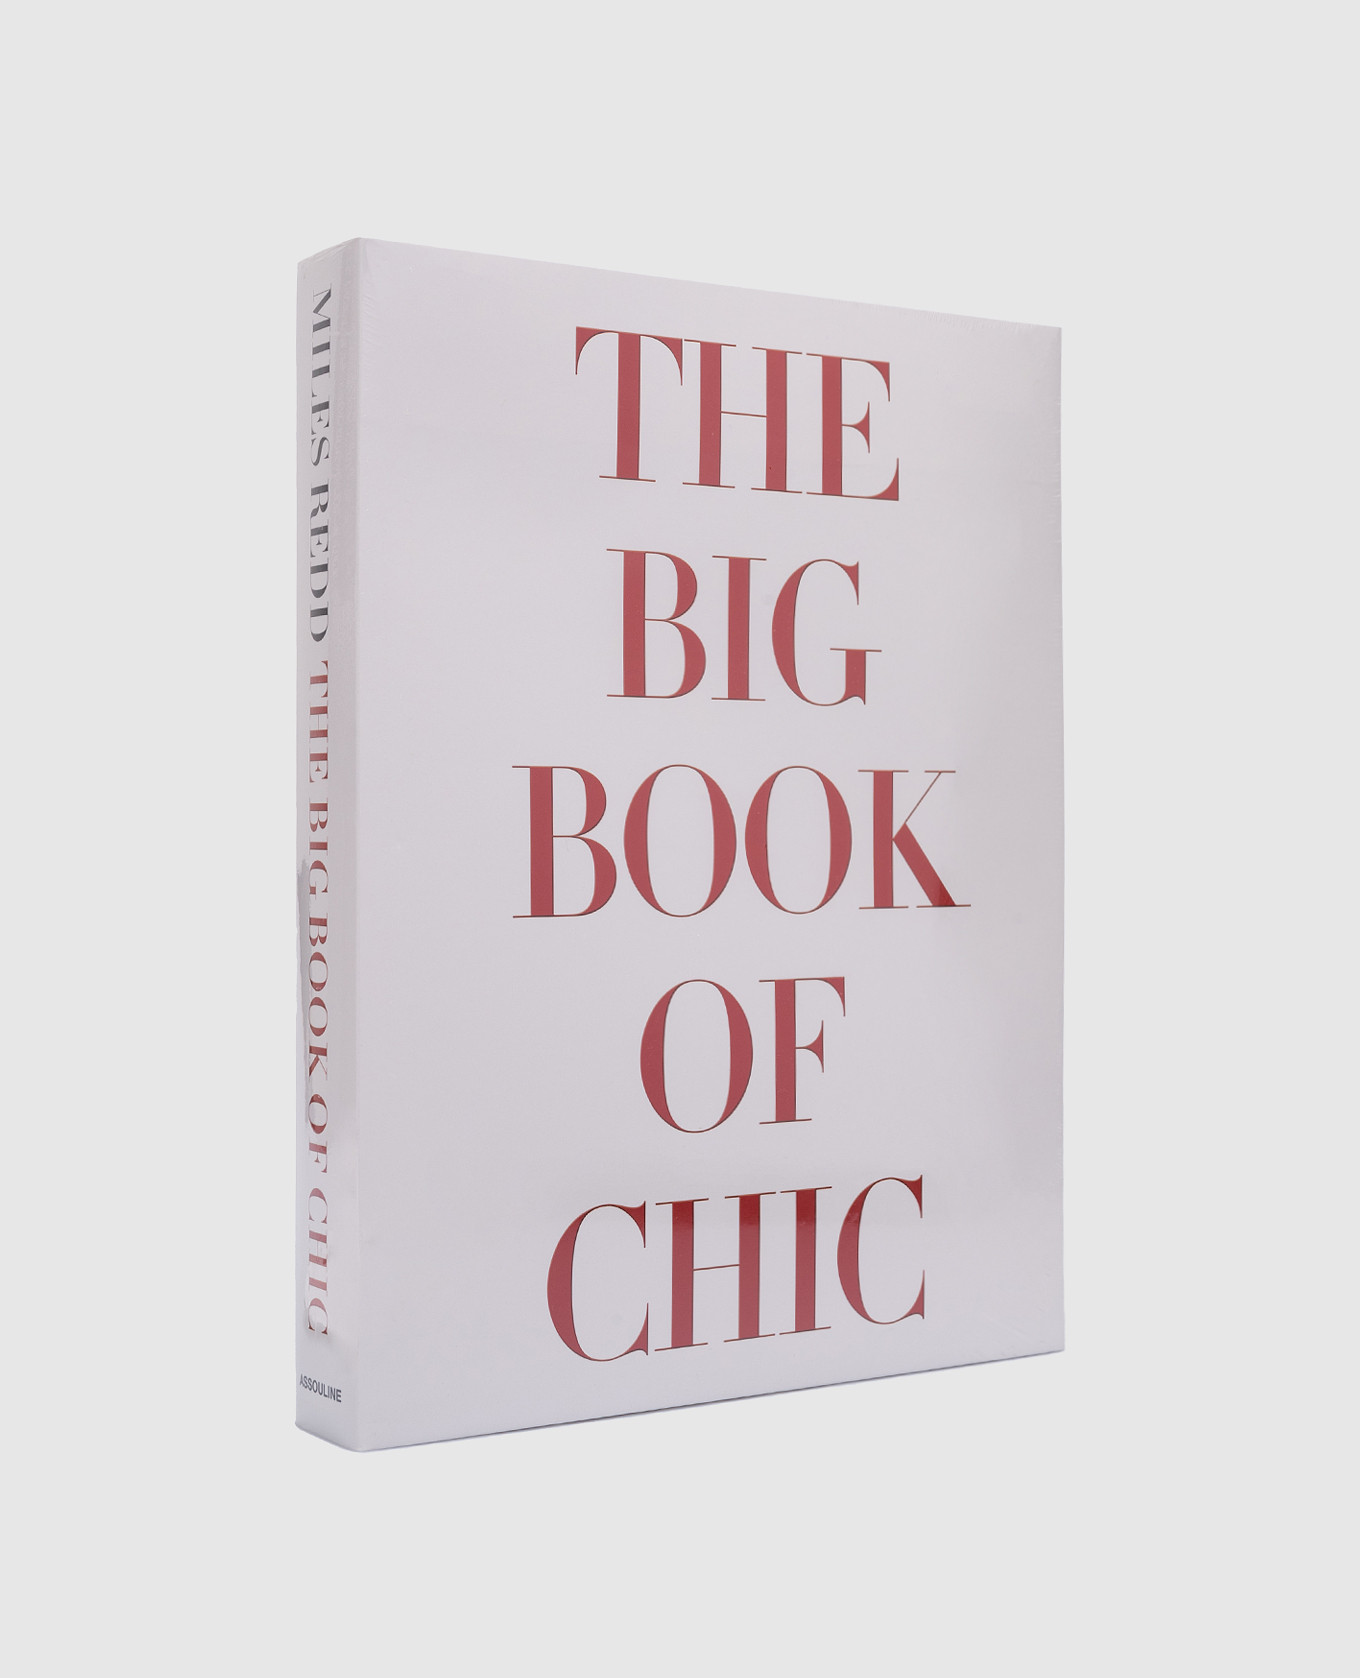 The book The Big Book of Chic